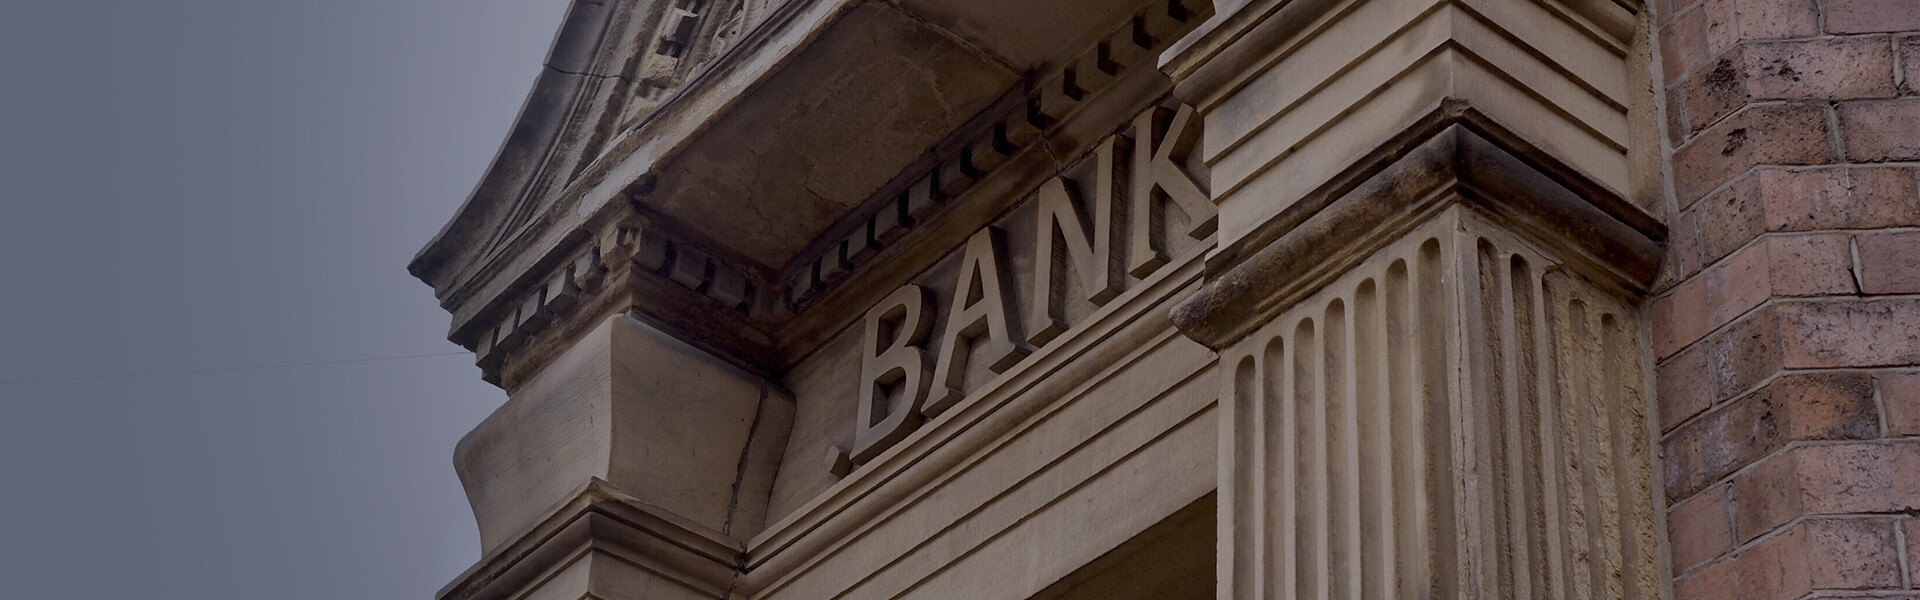 an image of a bank